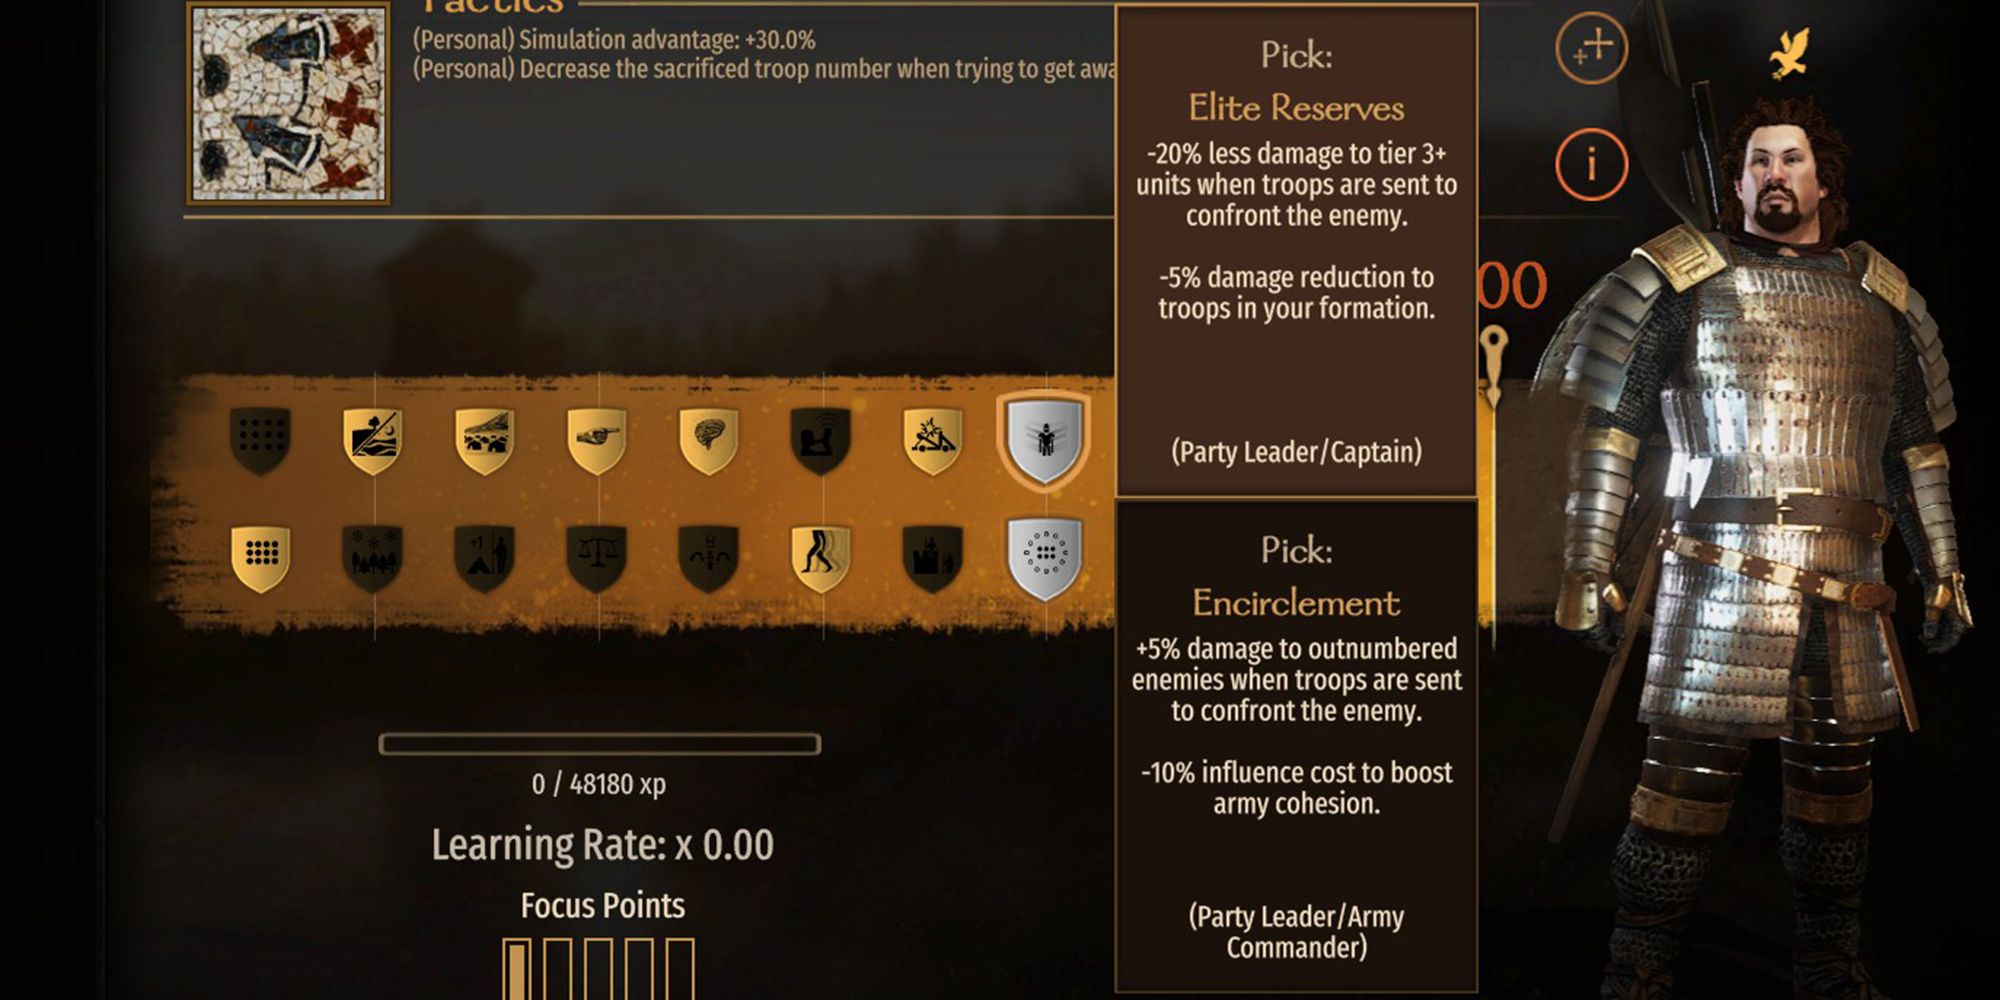 Tactics Elite Reserve Perks Menu Description -20% damage against tier 3+ units when troops are dispatched to engage the enemy.  -5% damage reduction against units in formation.